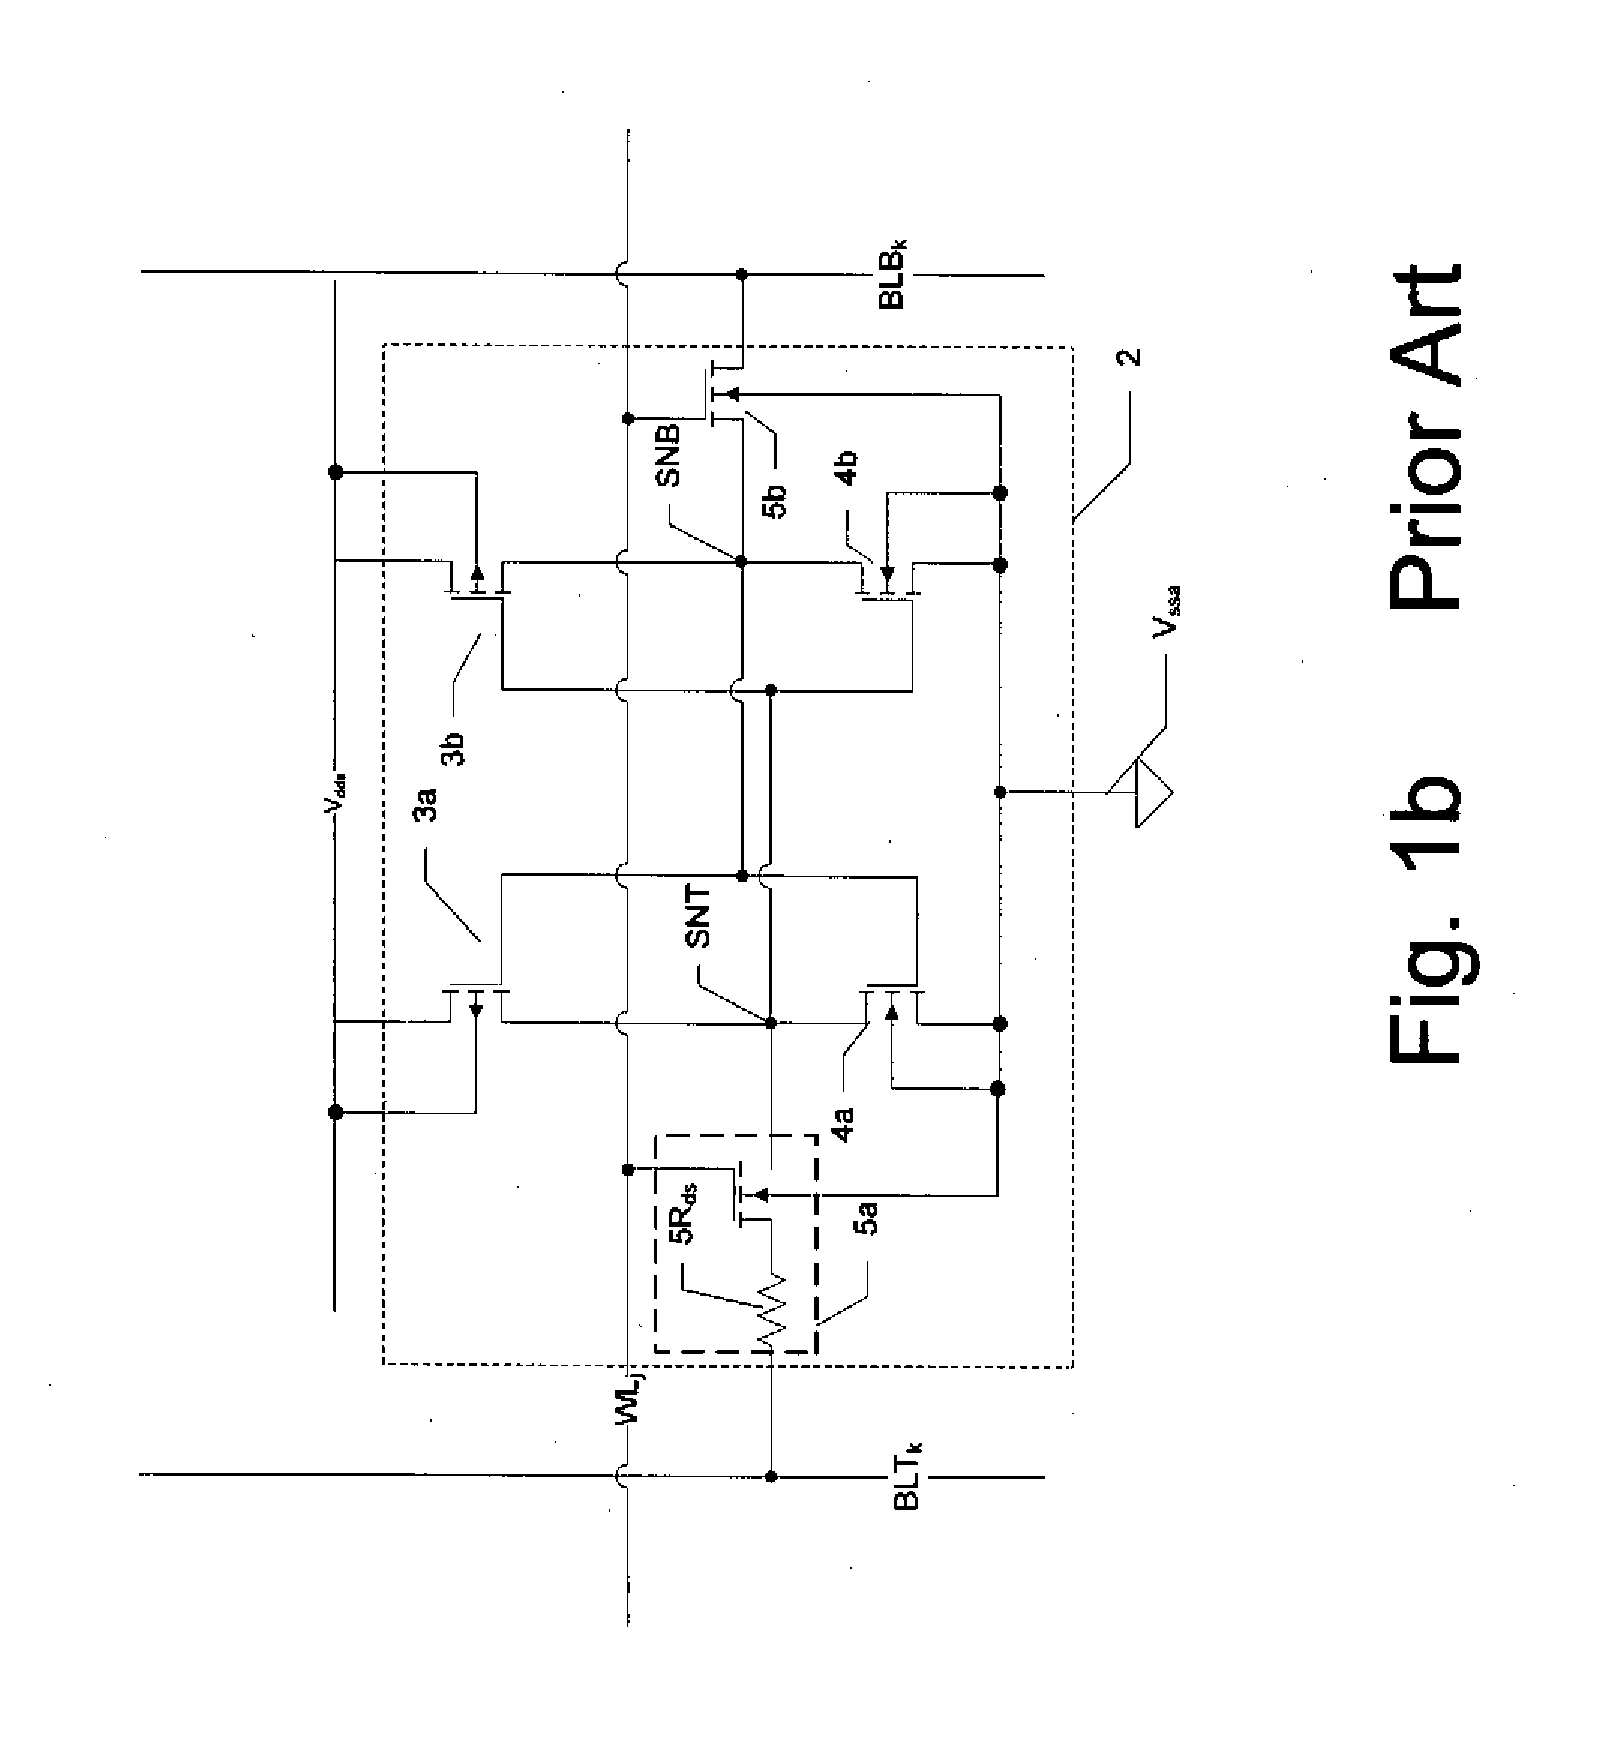 Method of Stressing Static Random Access Memories for Pass Transistor Defects